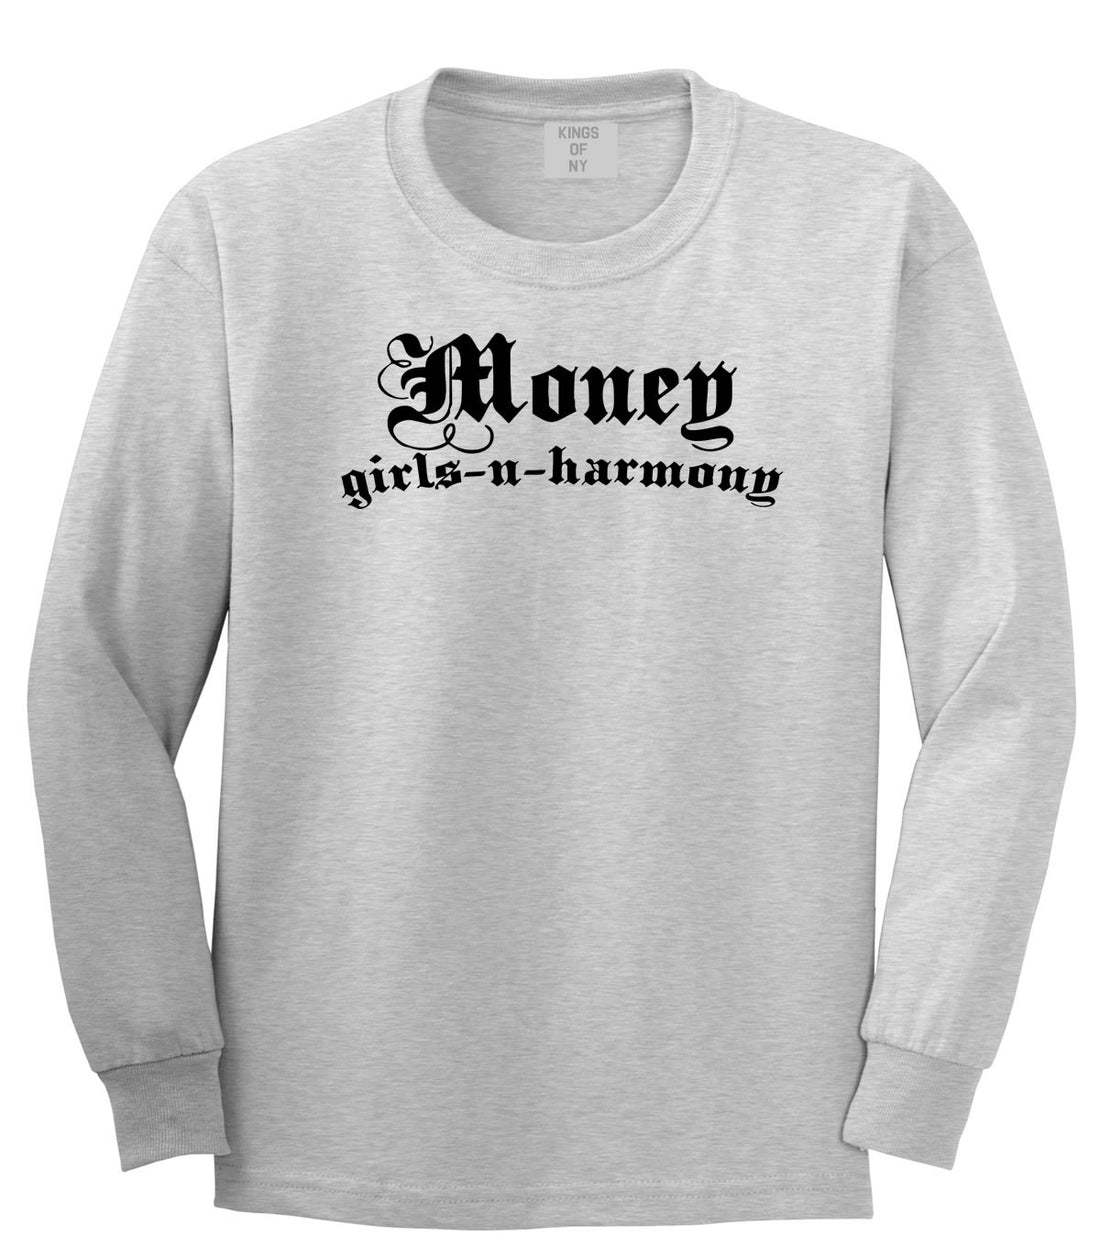 Money Girls And Harmony Long Sleeve T-Shirt in Grey By Kings Of NY